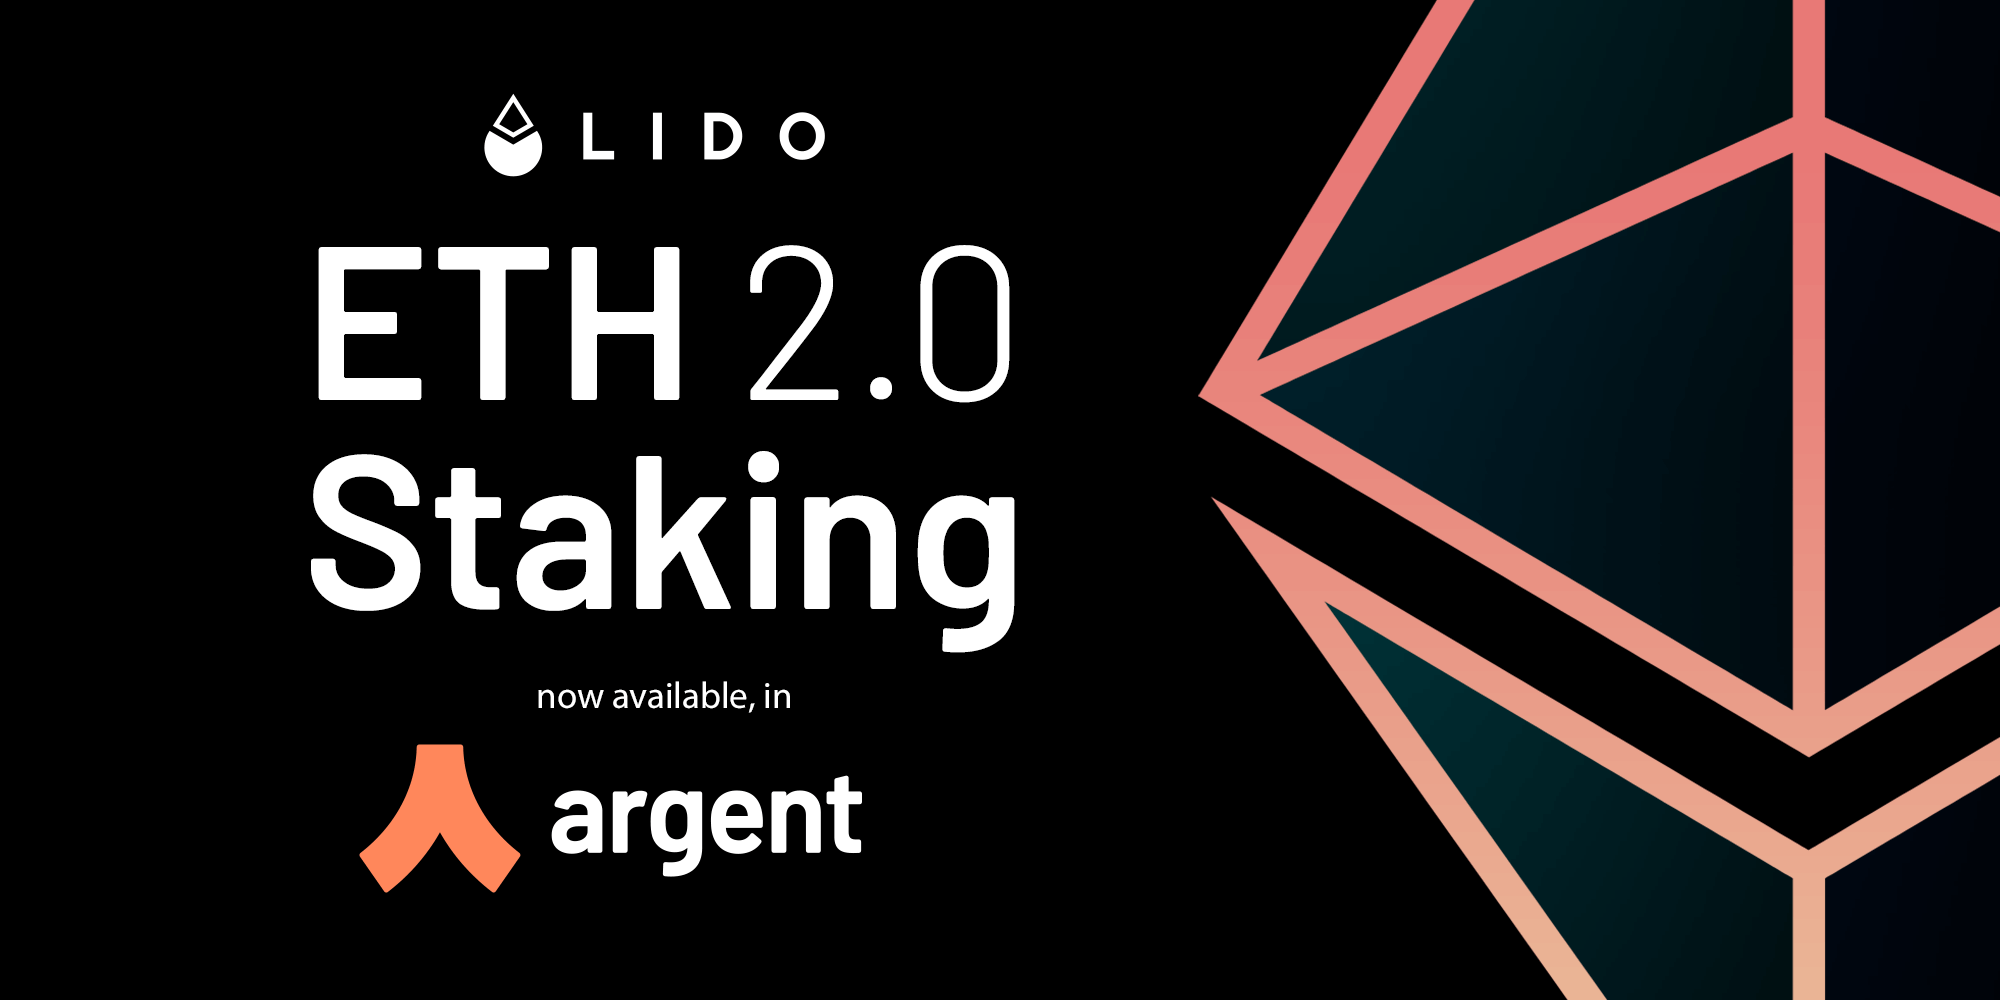 ETH 2.0 Staking now available, in Argent